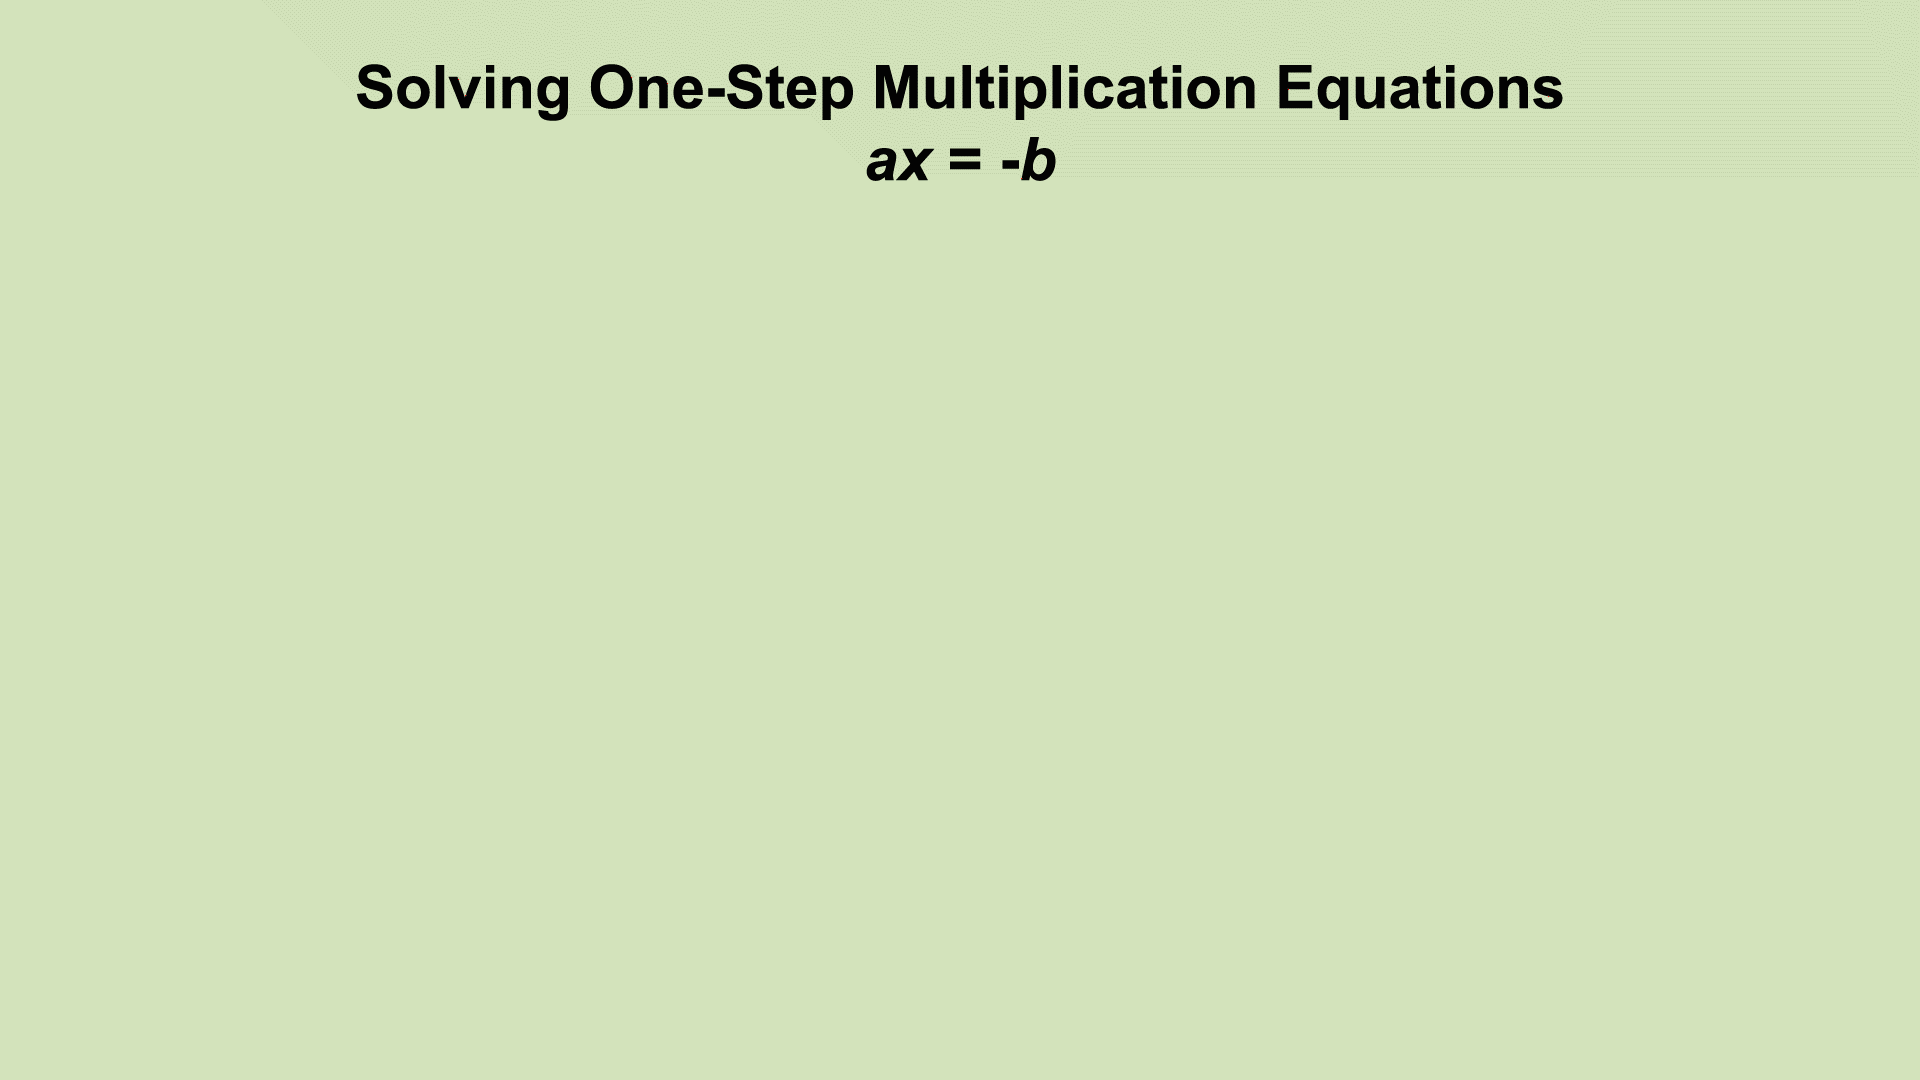 In this example the one-step equation shows multiplication by a positive number.